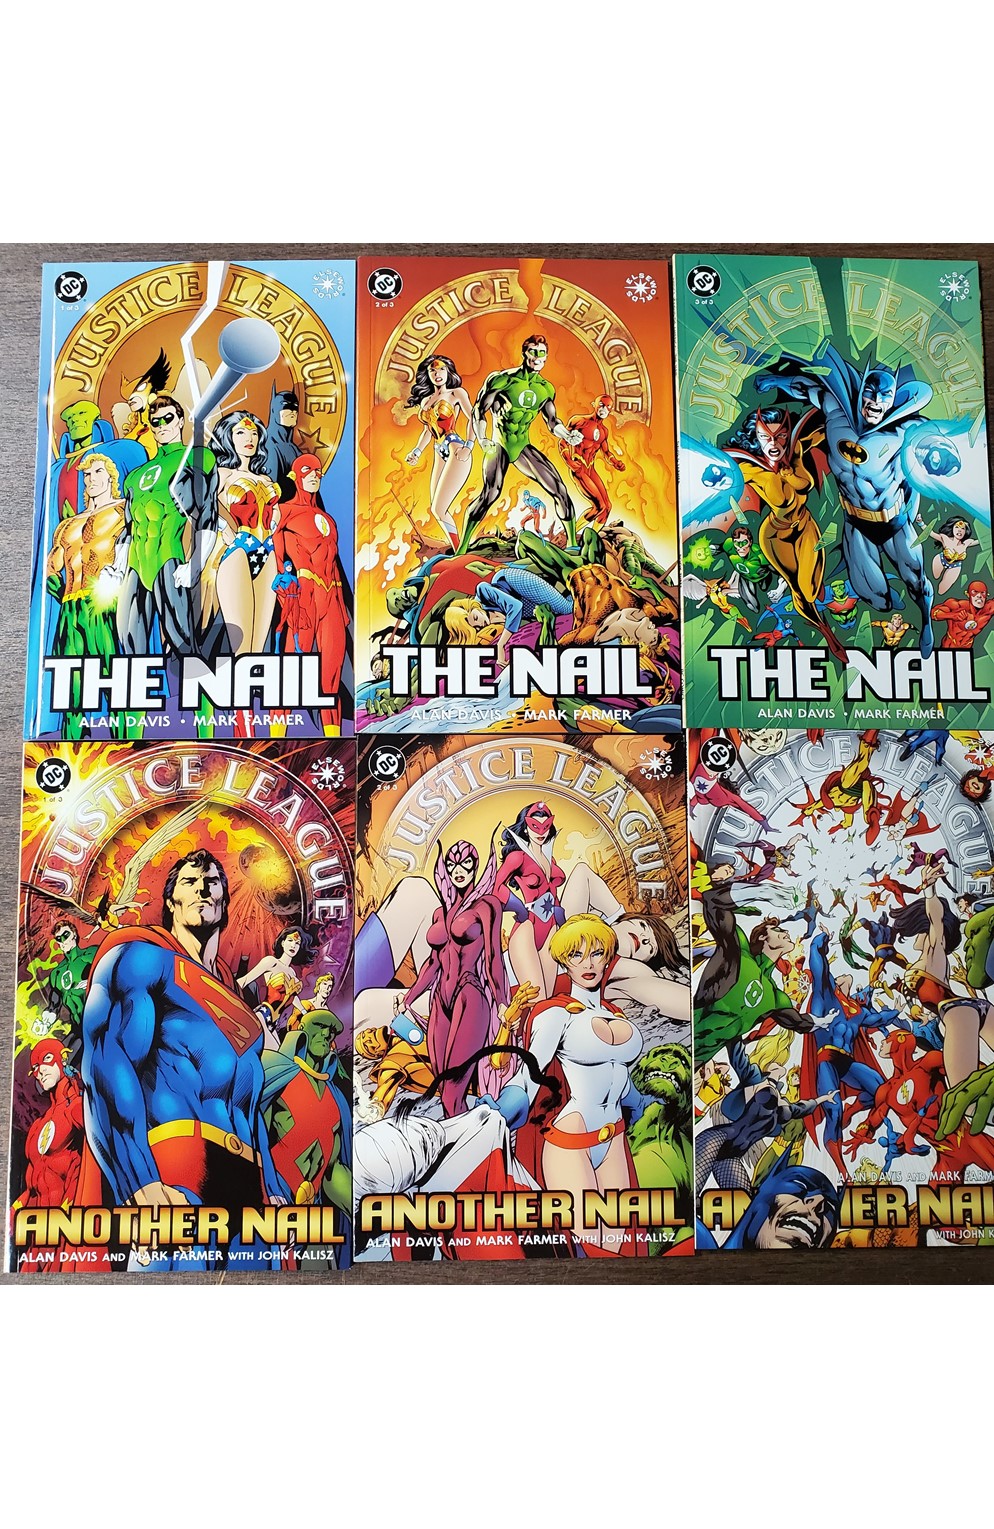 Justice League The Nail #1-3, Another Nail #1-3 (DC 1998 2004) Set